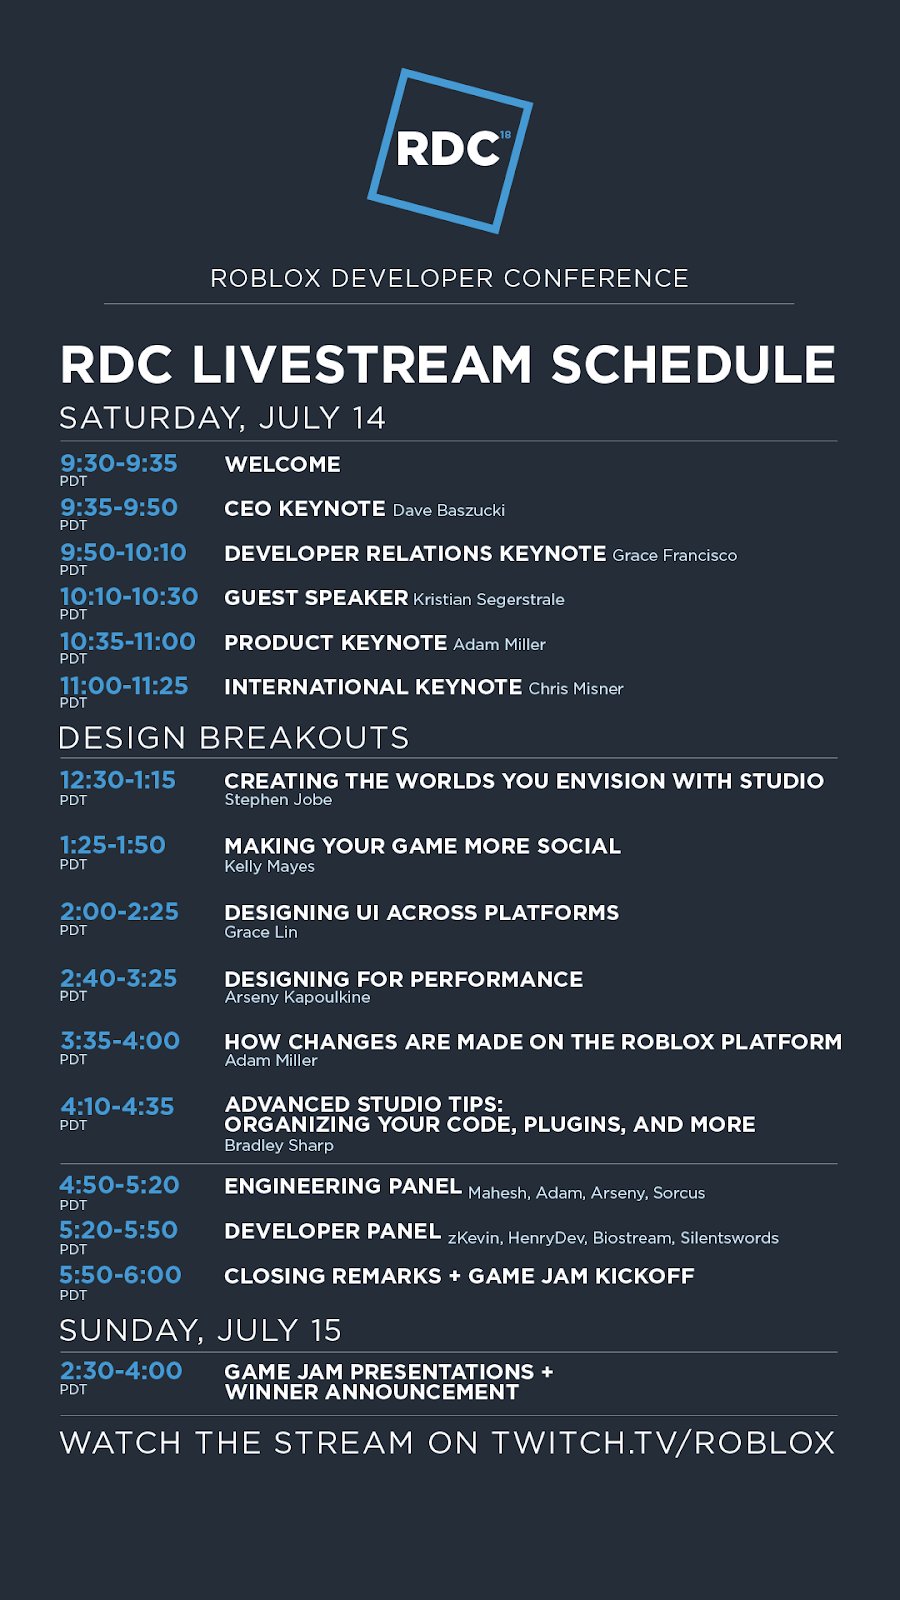 Free Robux! on X: Enjoy #RDC2018 live from your own home! Catch